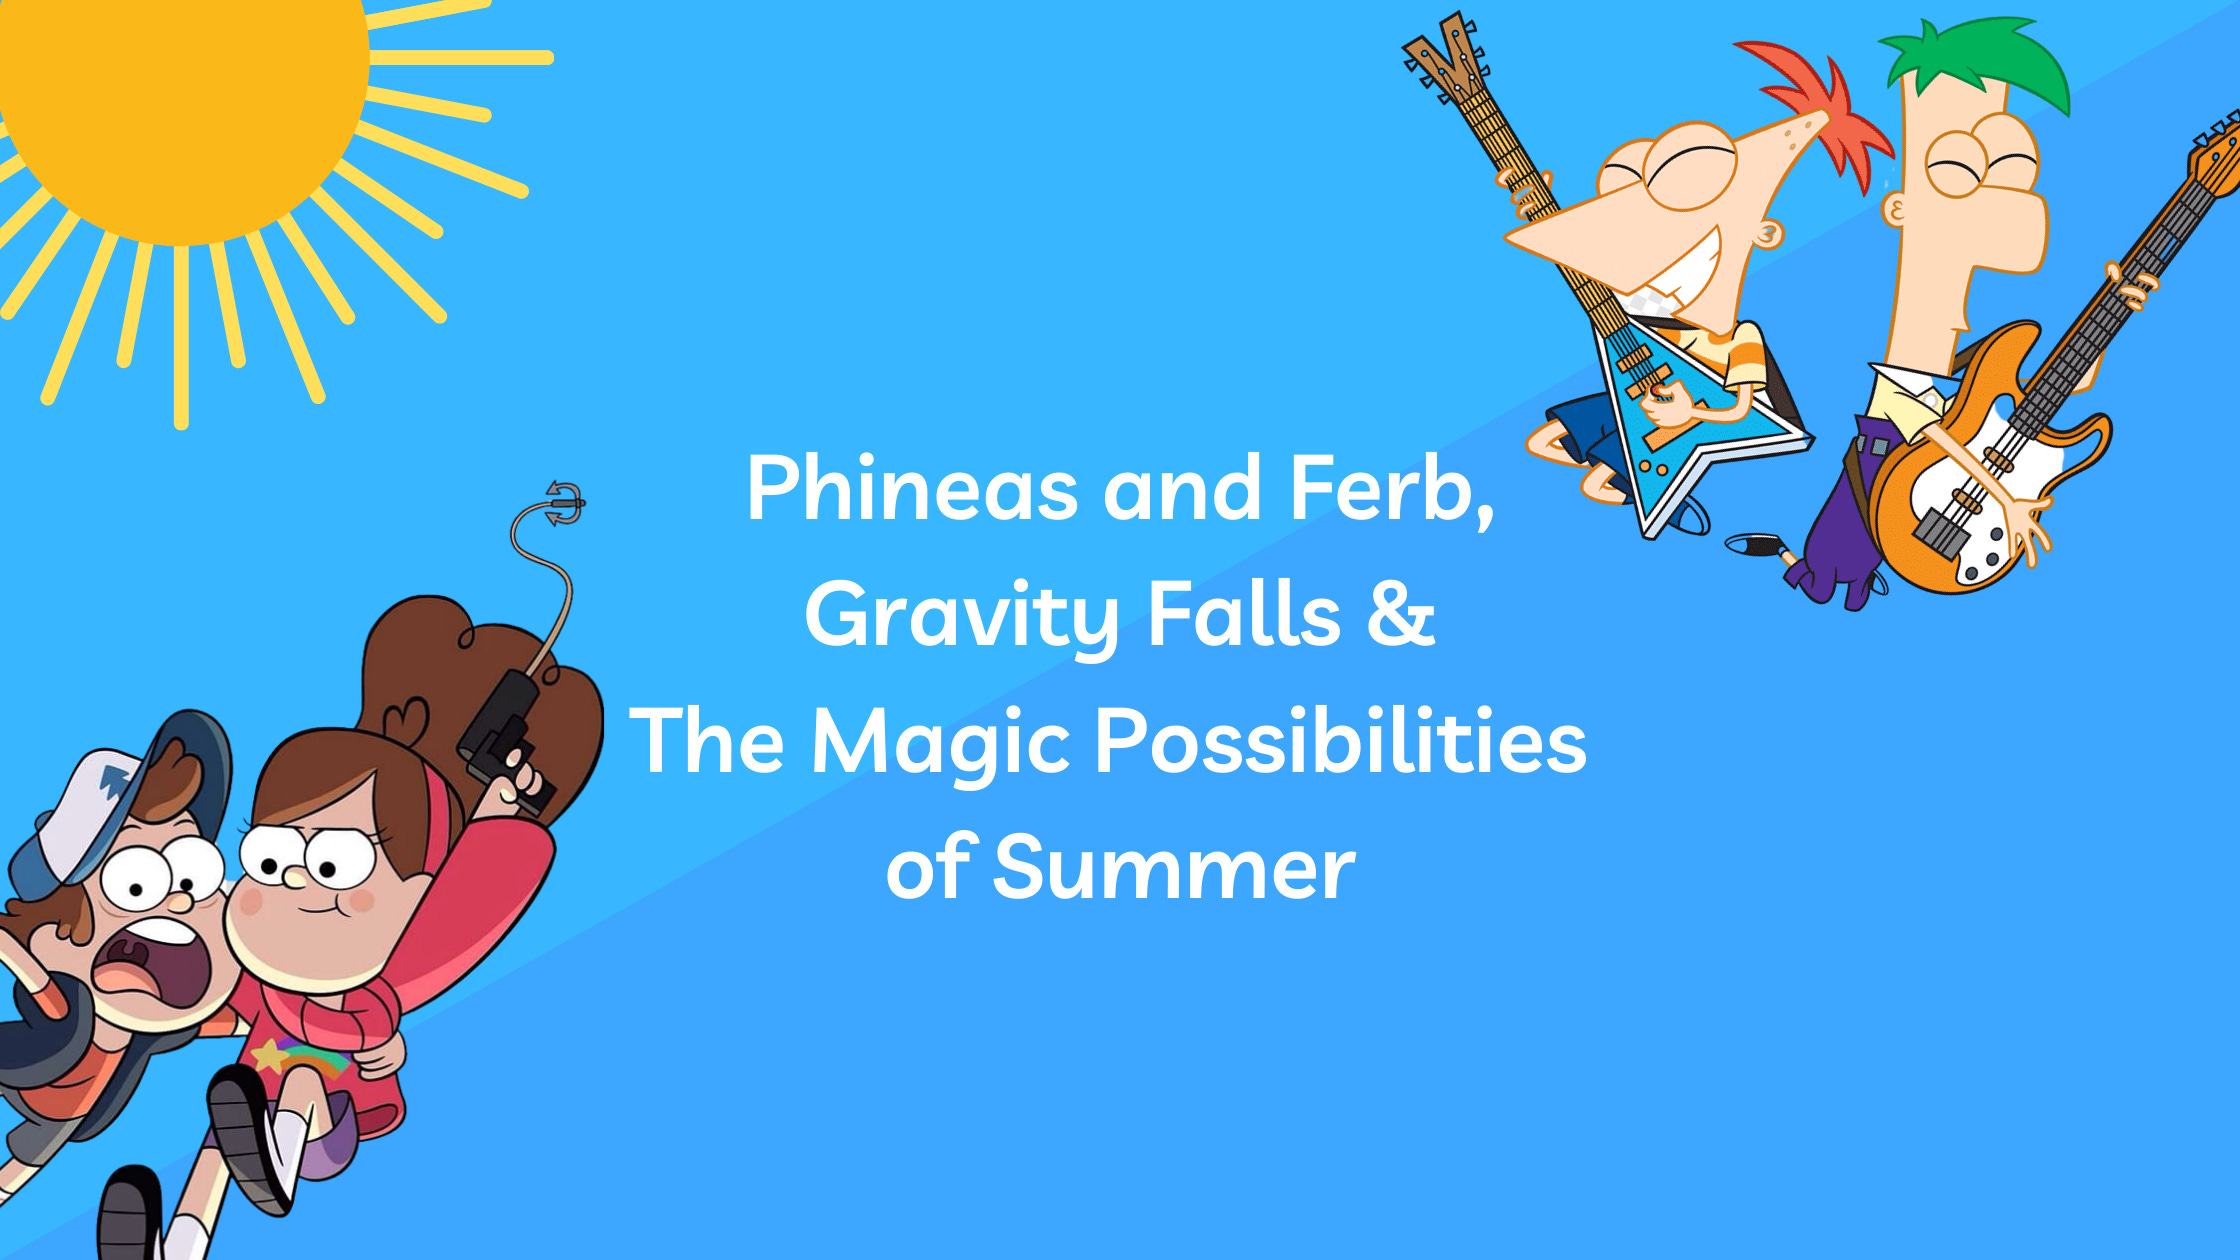 Gravity Falls' is the perfect show for the start of summer